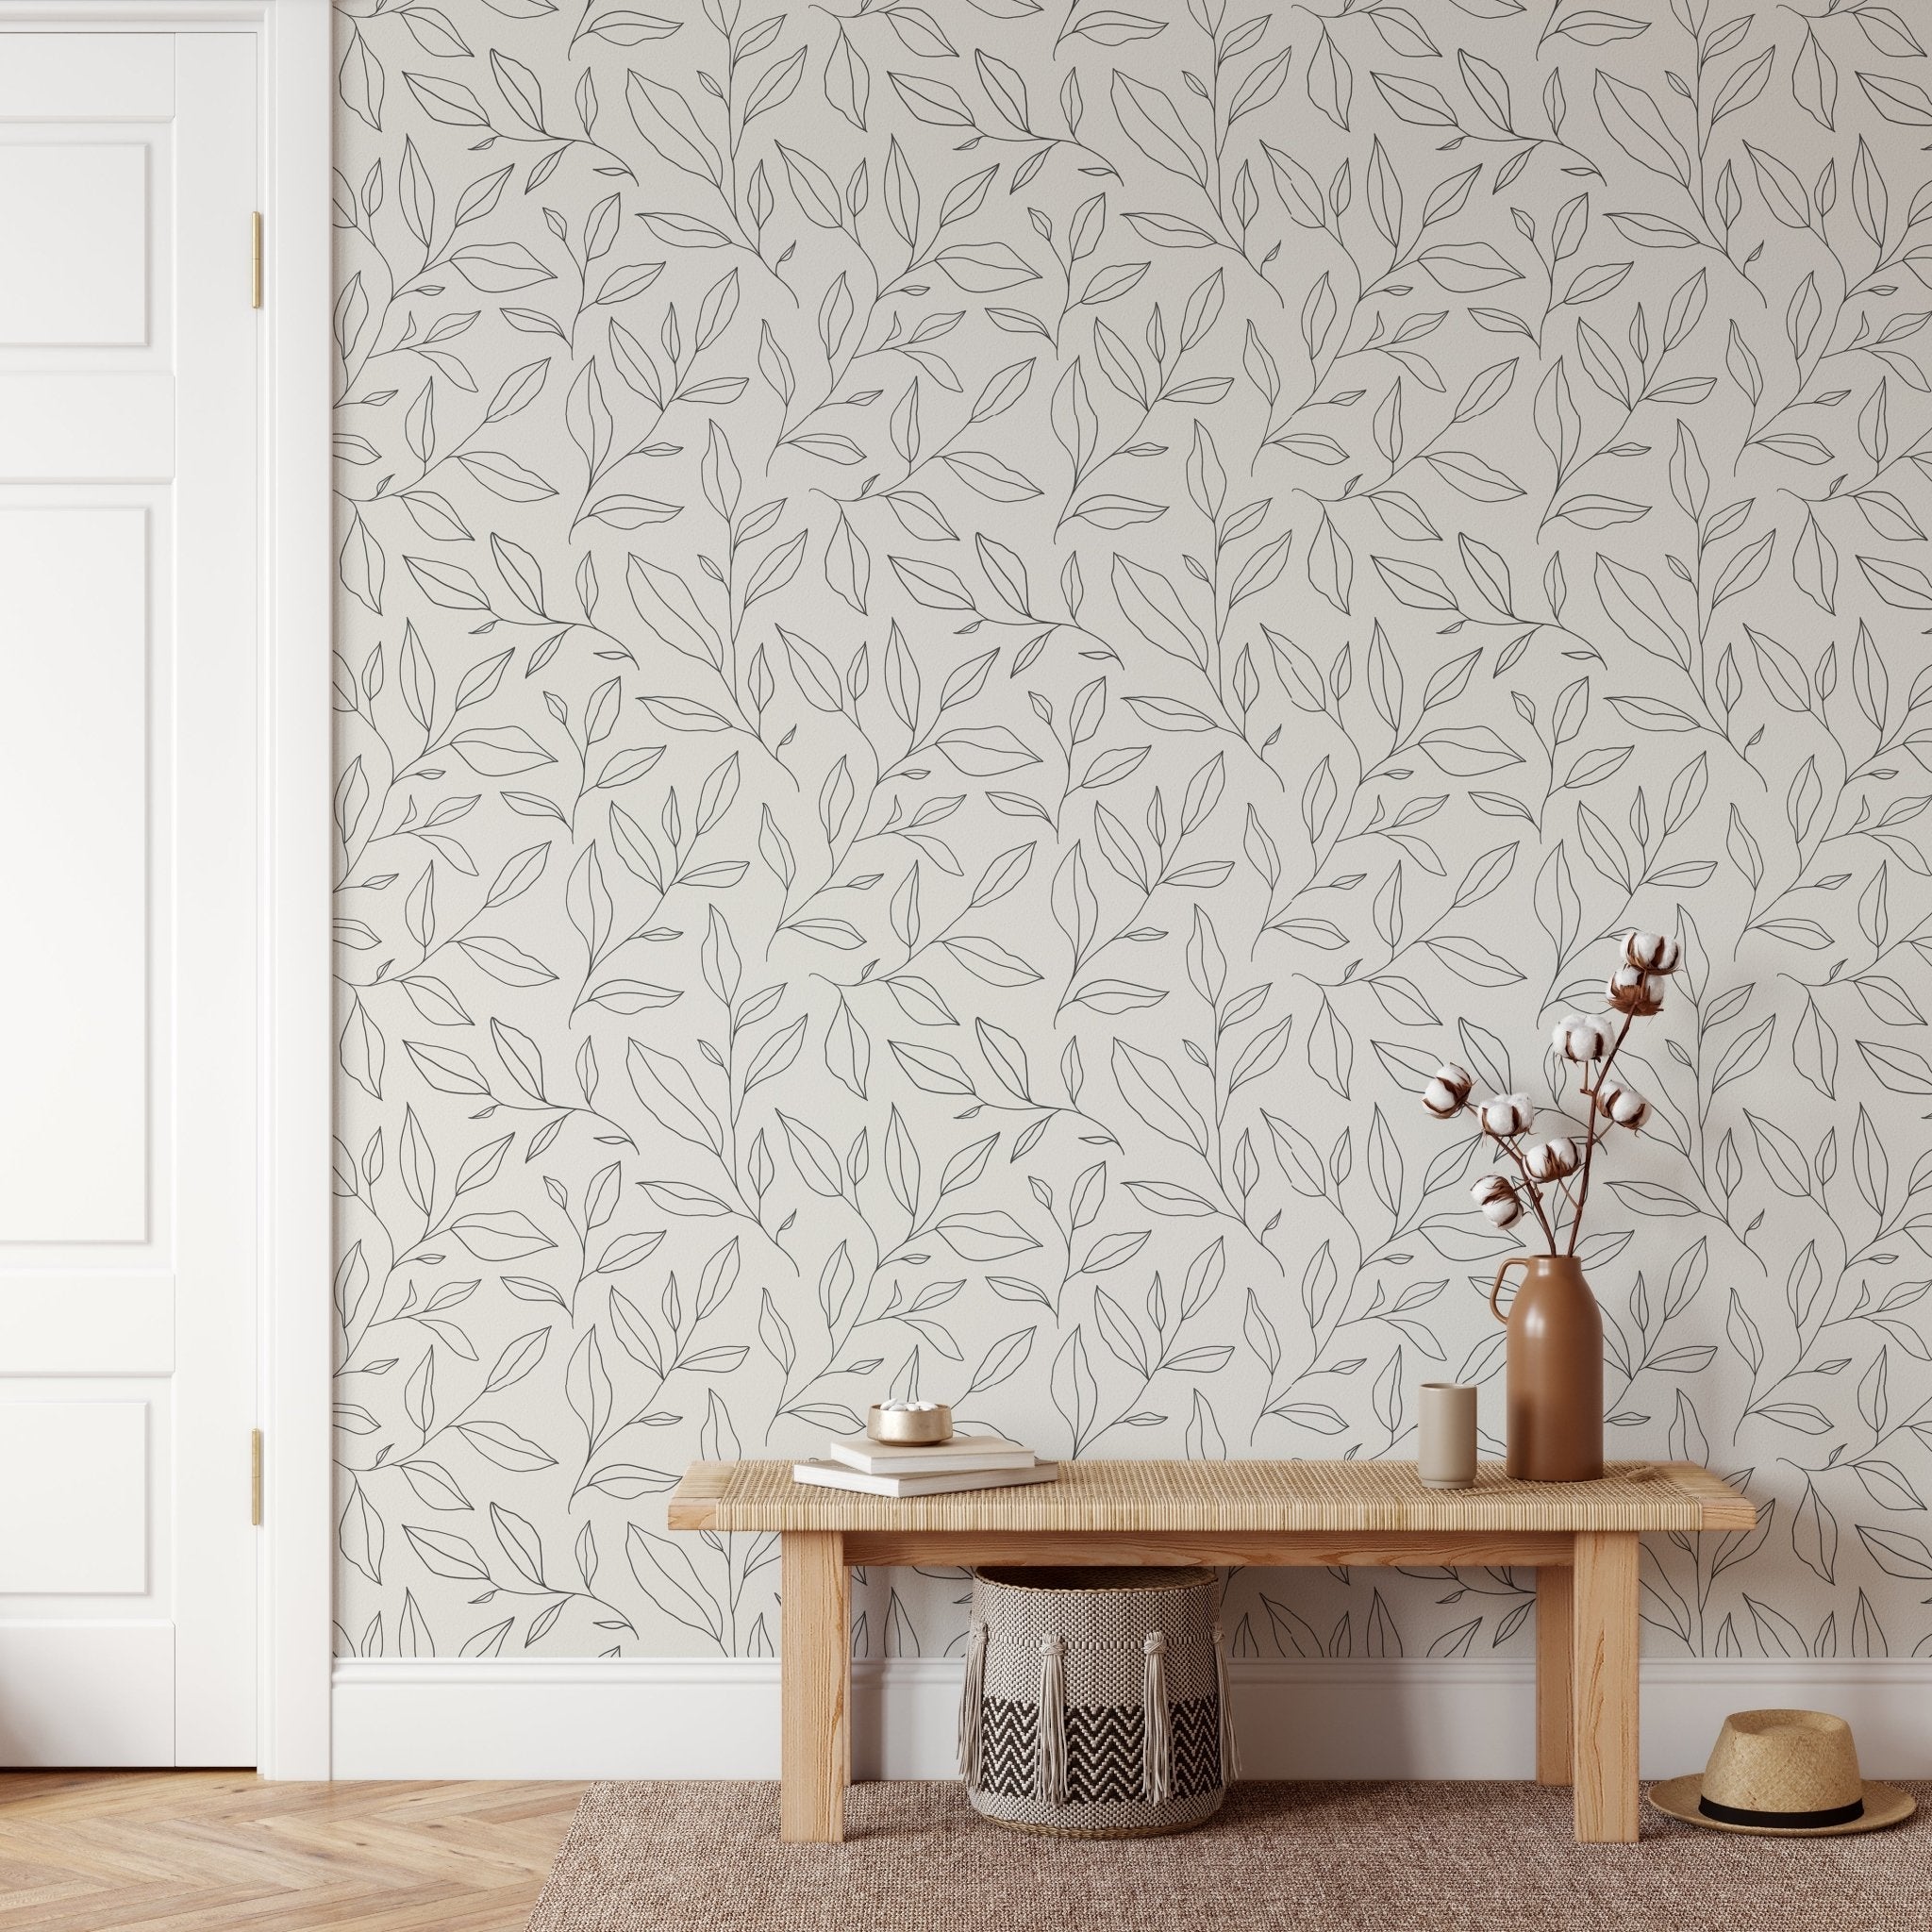 Minimal Floral Peel and Stick Wallpaper for Walls, Peel and Stick Removable Wallpaper, Peel and Stick Wall paper, Peel and stick Wallpapers